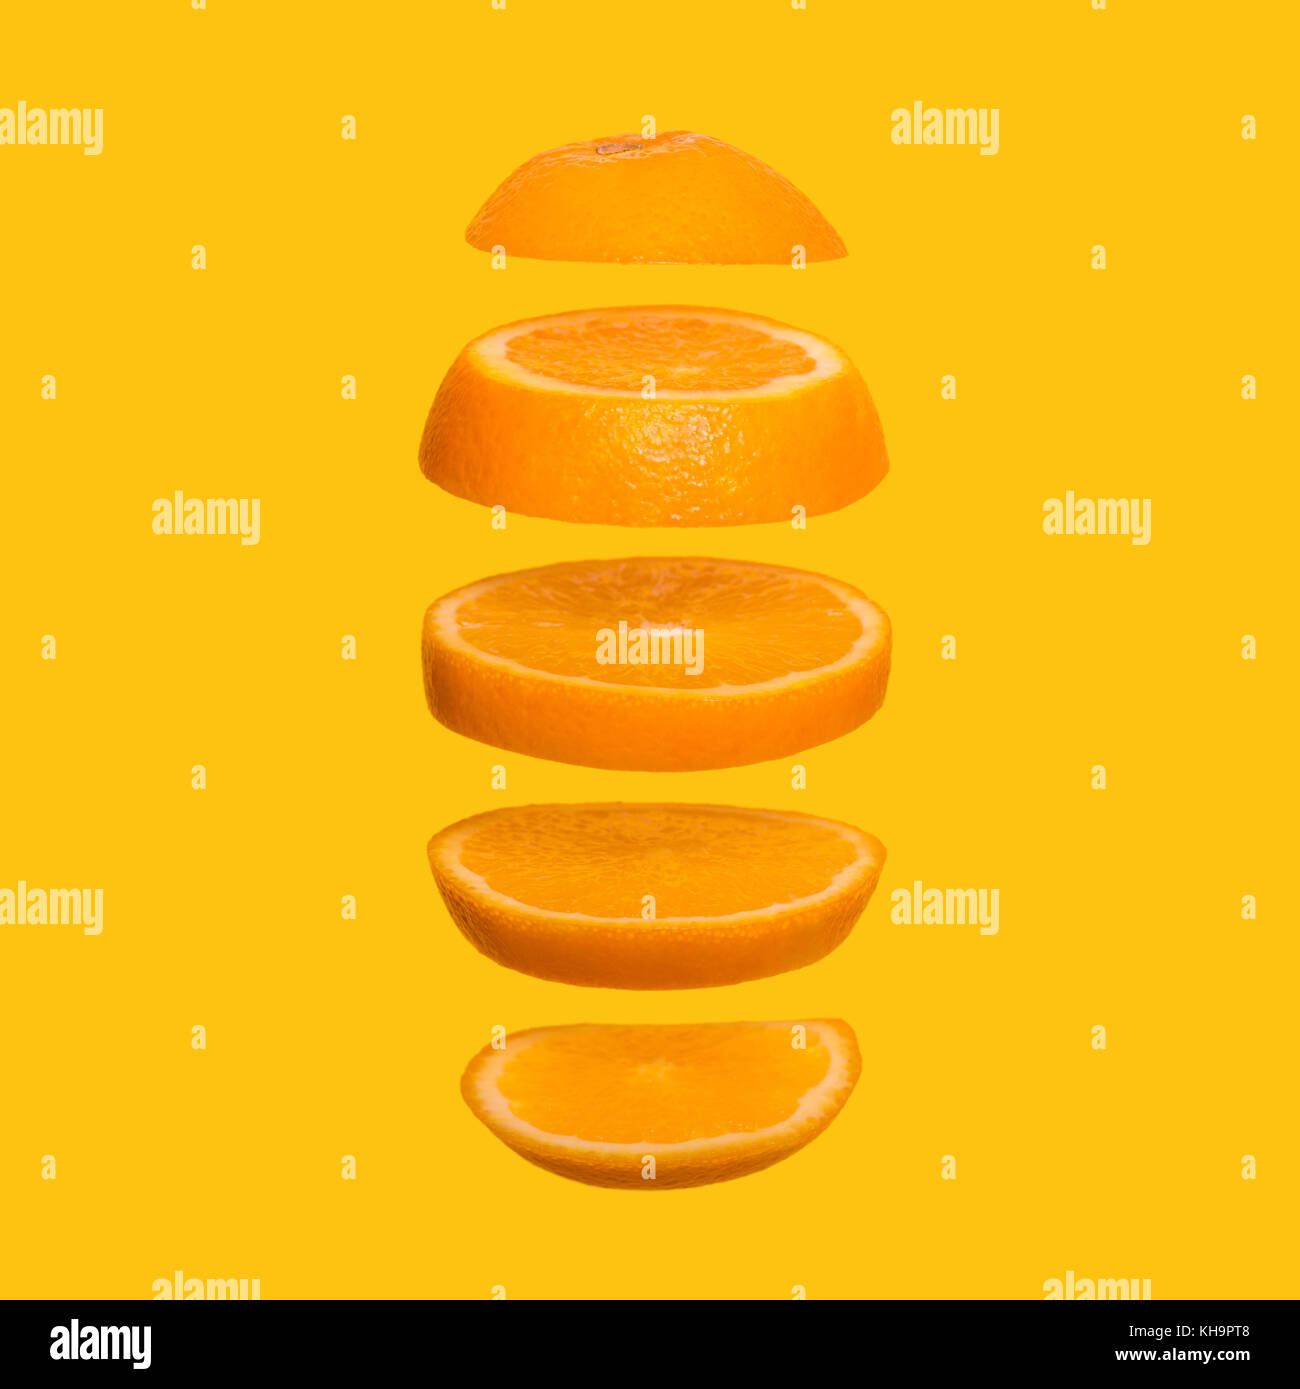 Creative concept with flying orange. Sliced orange on yellow background. Levity fruit floating in the air Stock Photo